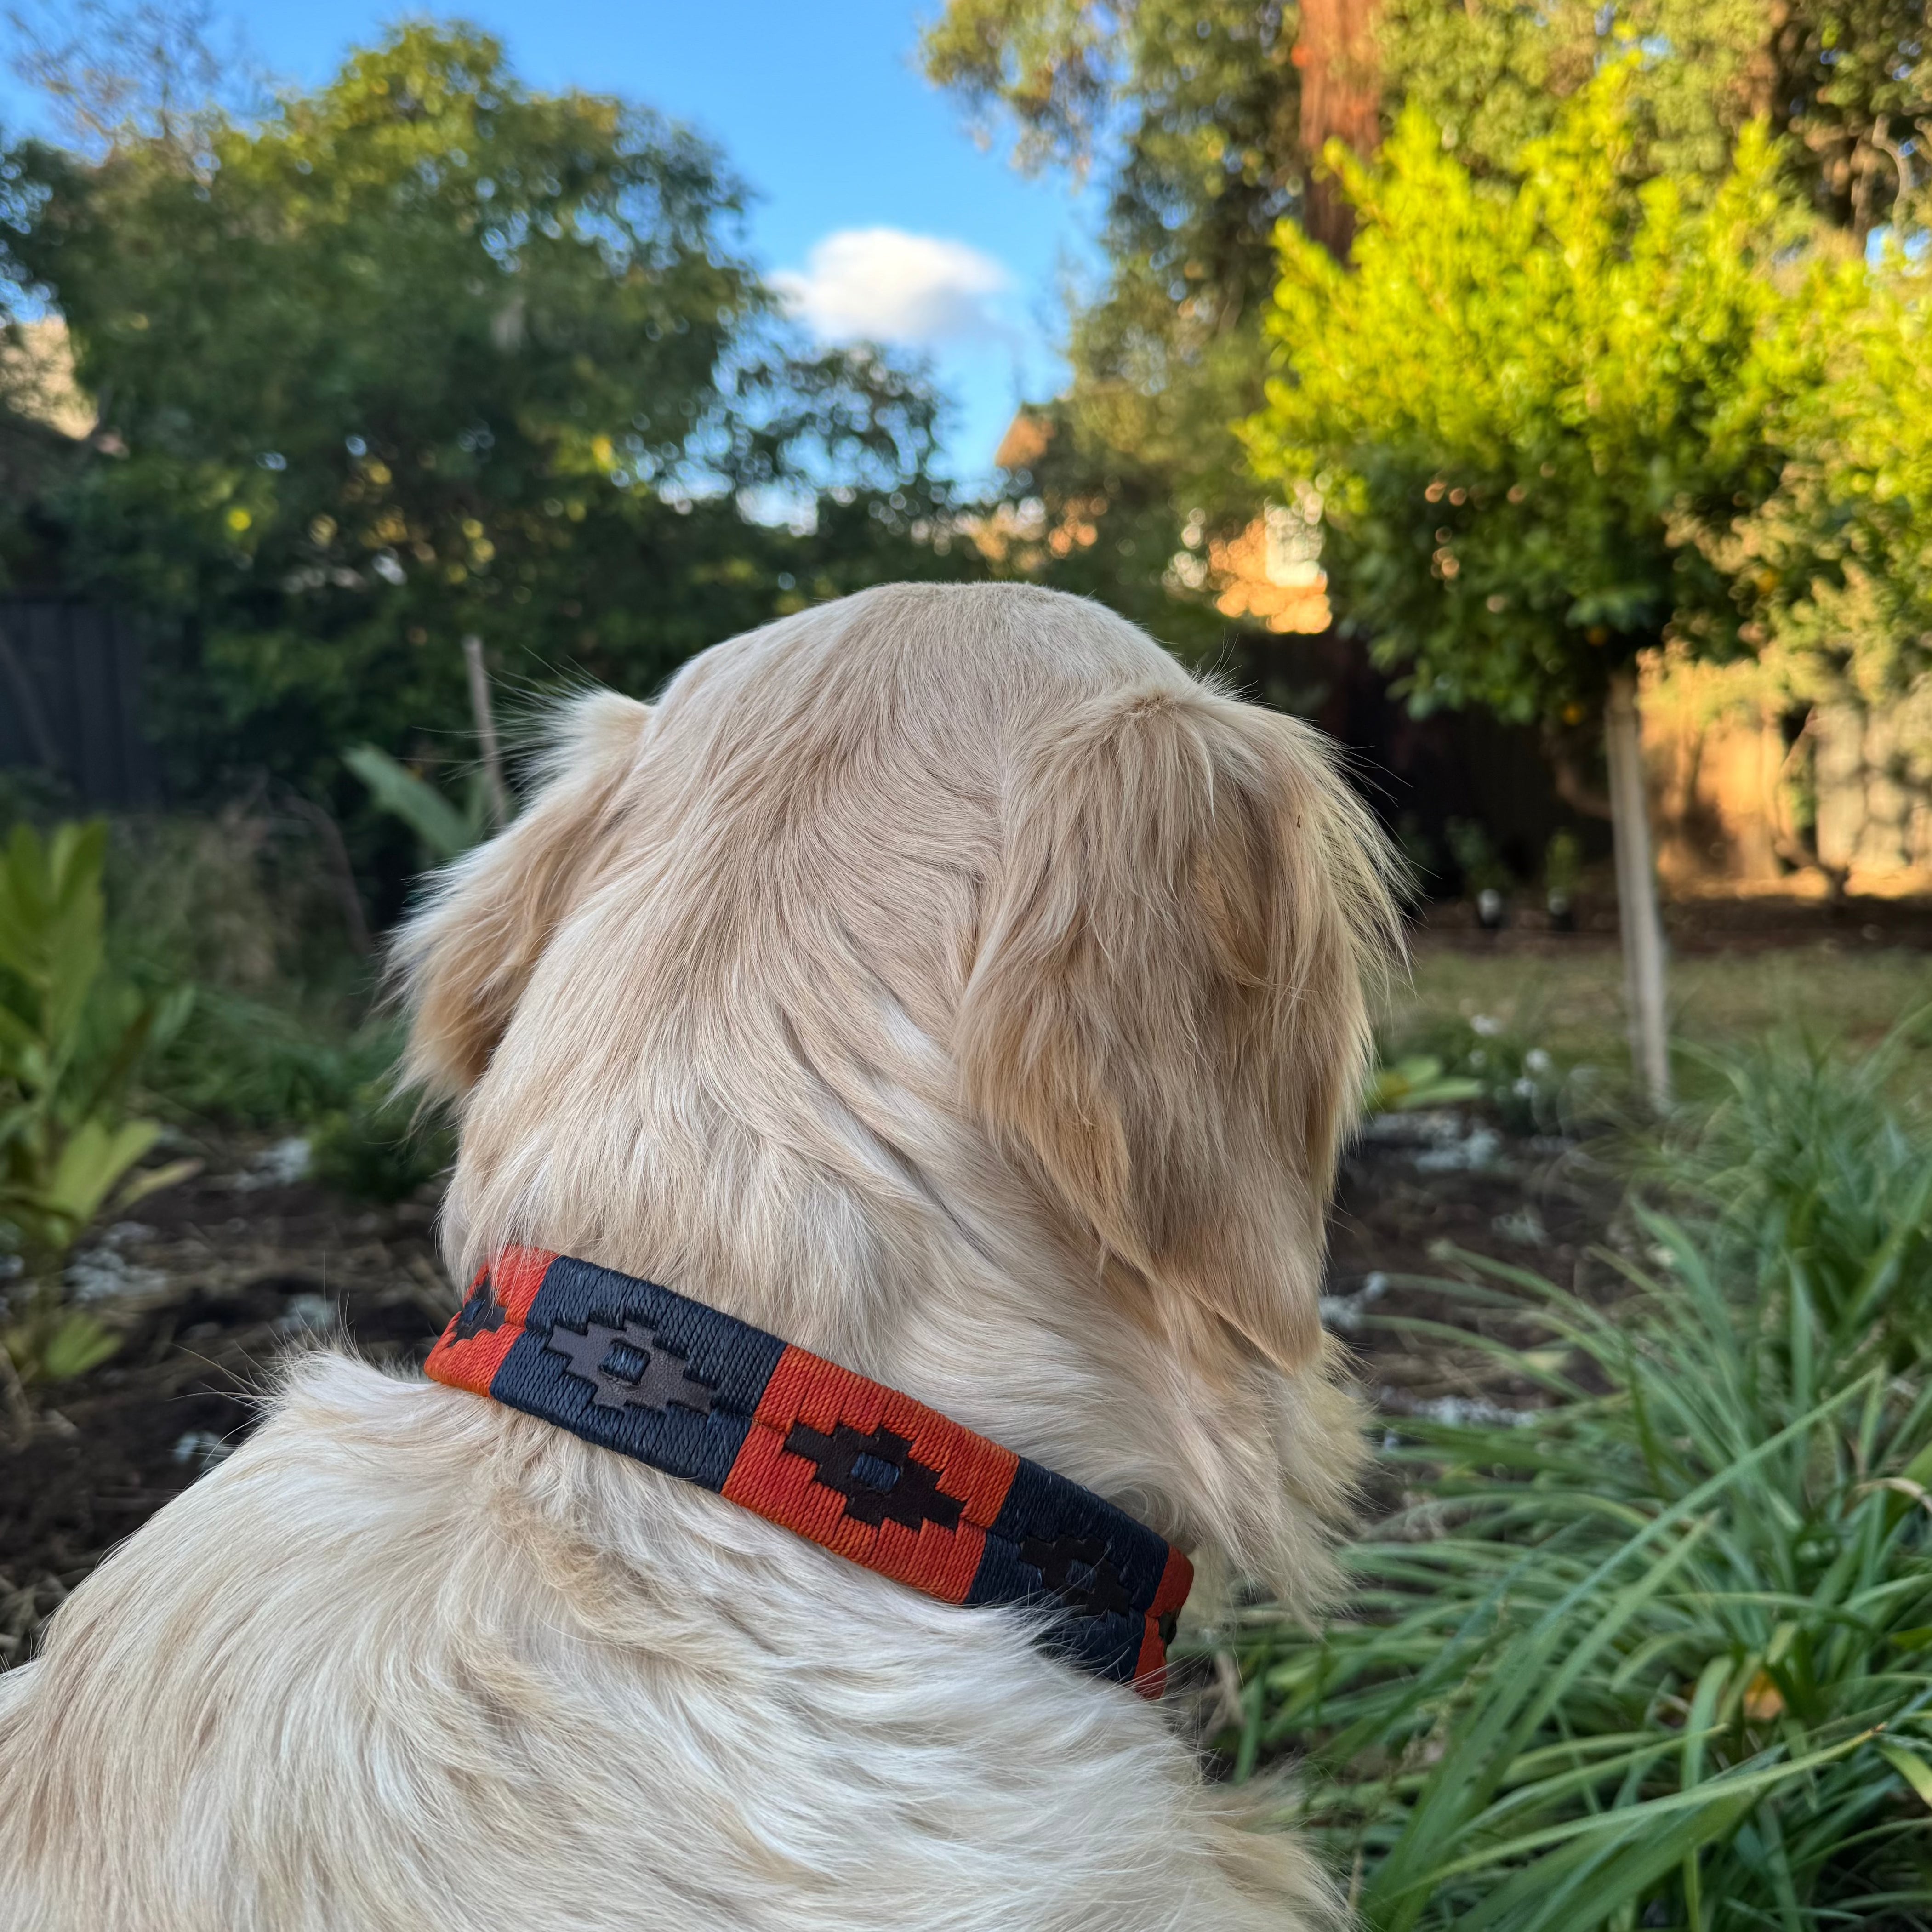 A water-loving golden retriever faces away from the camera, sitting in a lush garden with vibrant greenery. The dog wears a Georgie Paws Polo Collar - Spice made of handmade buffalo leather with a red, black, and white geometric pattern. Tall trees and various plants surround the scene as the sky overhead is partly cloudy.